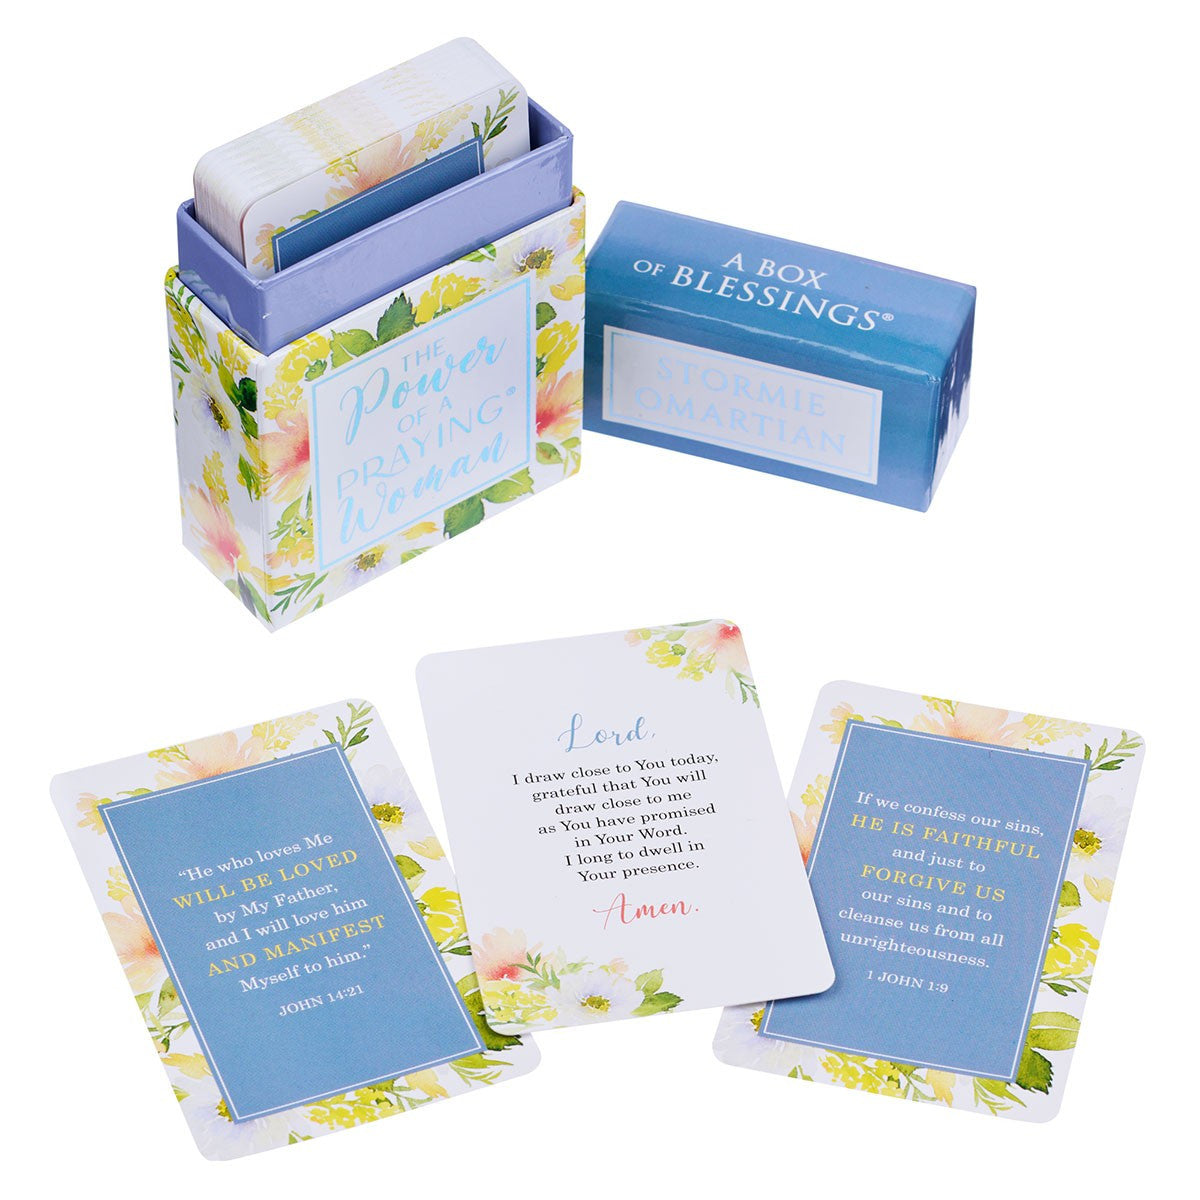 The Power of a Praying Woman Box of Blessings - The Christian Gift Company